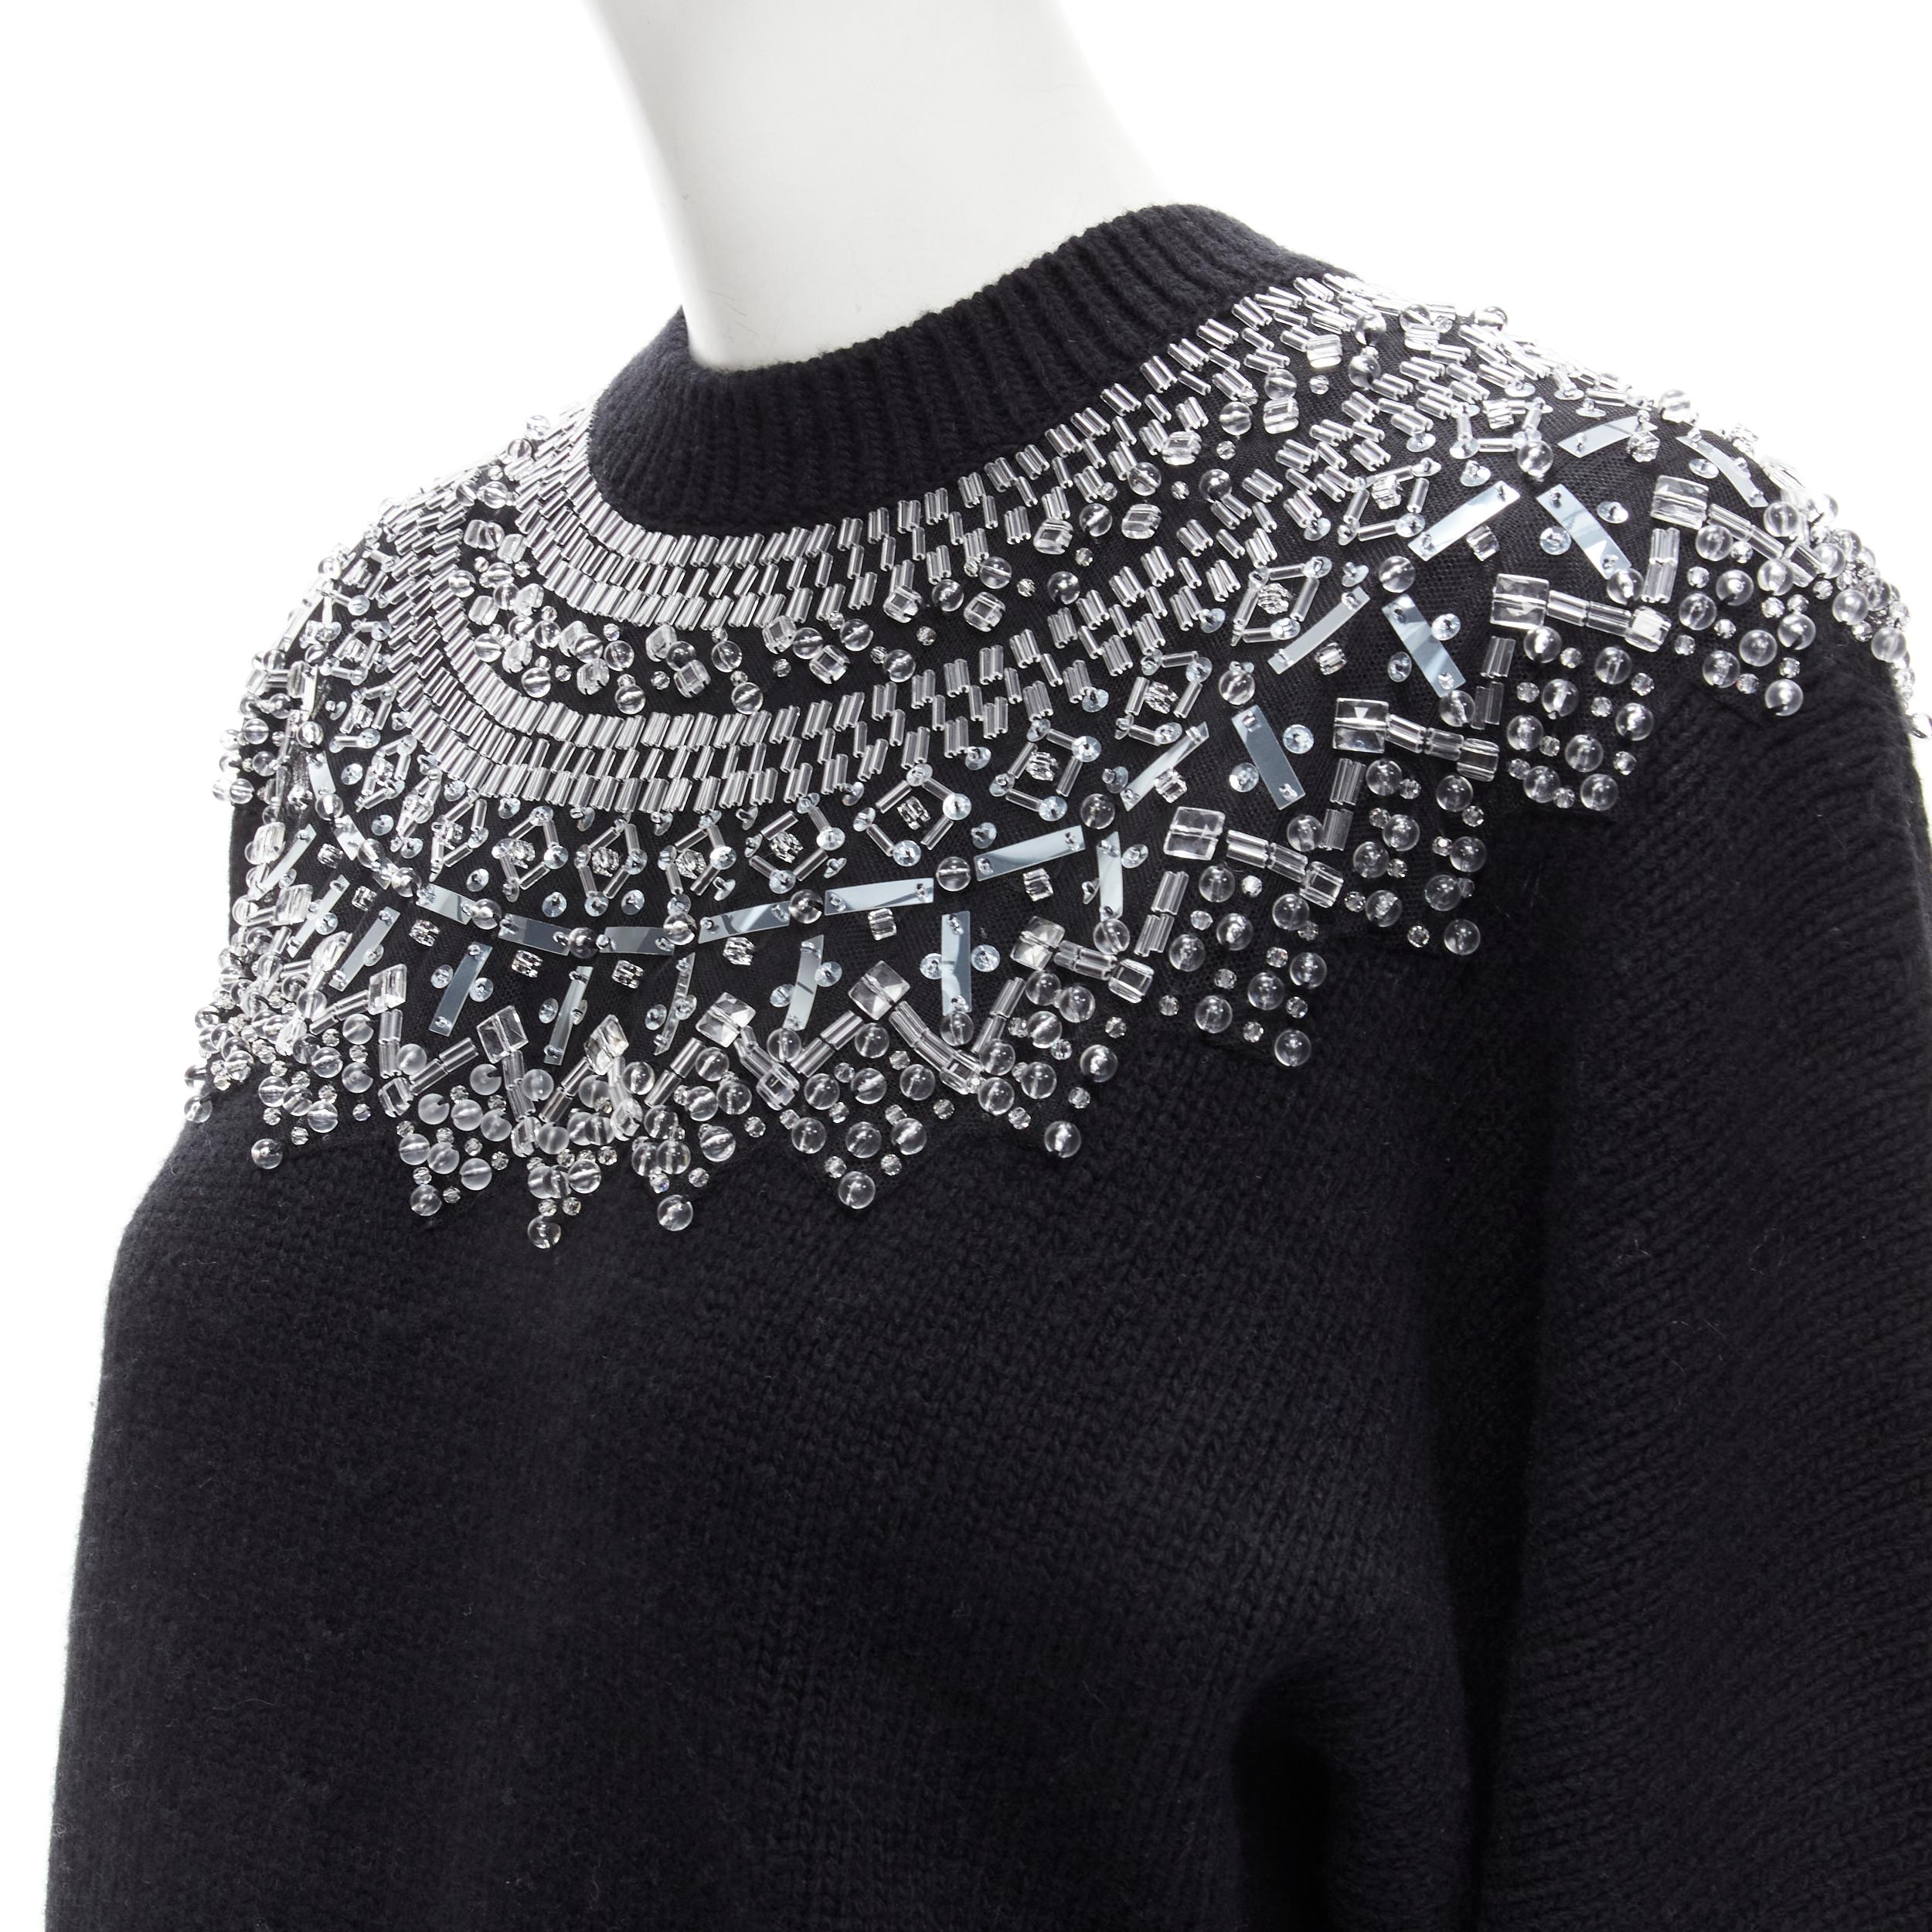 CHANEL wool cashmere black crystal bead embellished fairisle sweater FR34 XS
Brand: Chanel
Material: Wool
Color: Black
Pattern: Solid
Extra Detail: Black crew neck wool-cashmere blend sweater. Clear bead, sequins and crystal embellishment at collar.